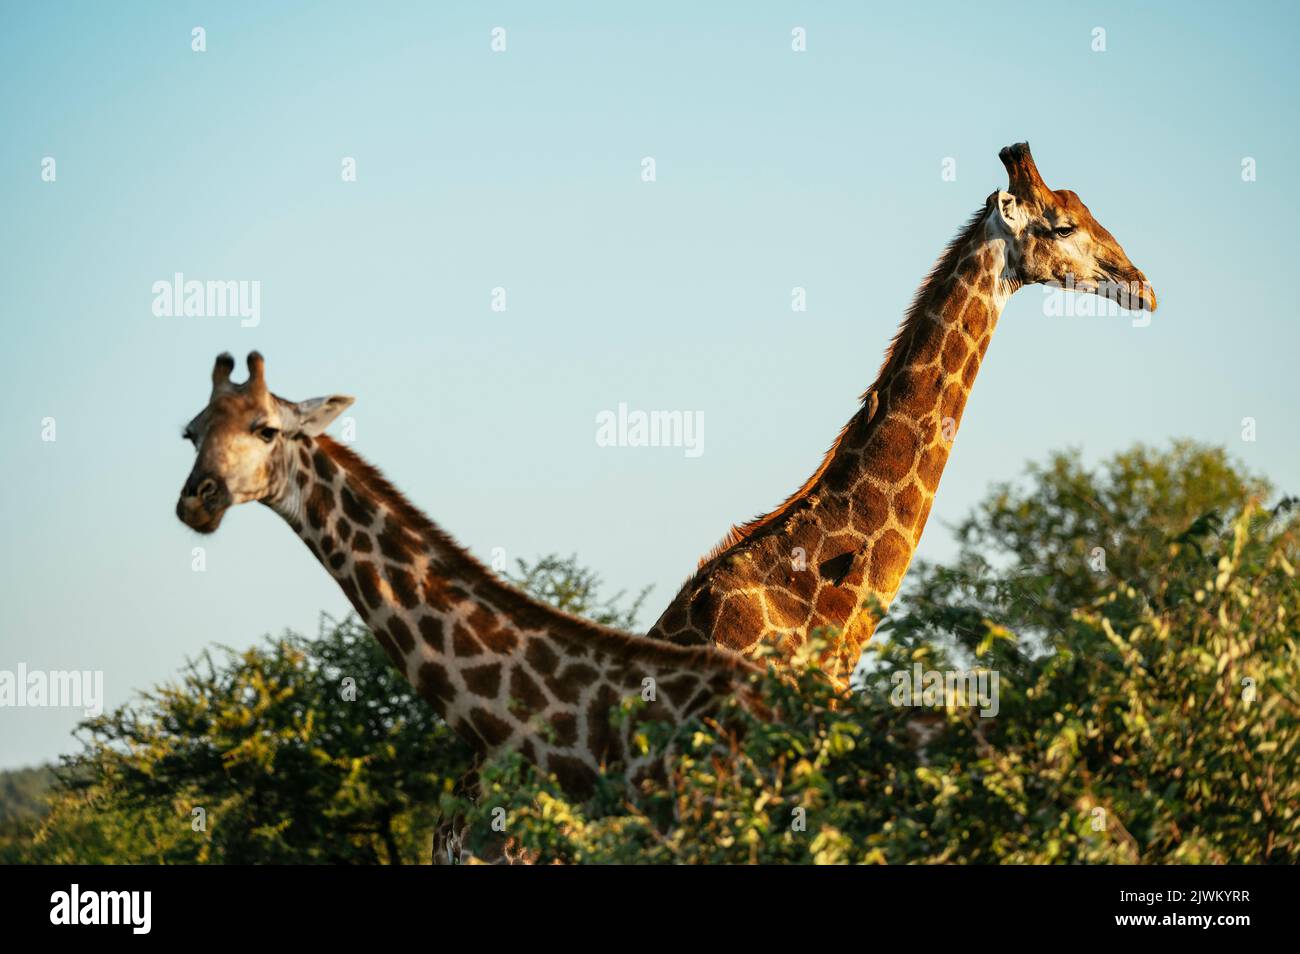 Giraffe, Timbavati Private Nature Reserve, Kruger National Park, South Africa Stock Photo